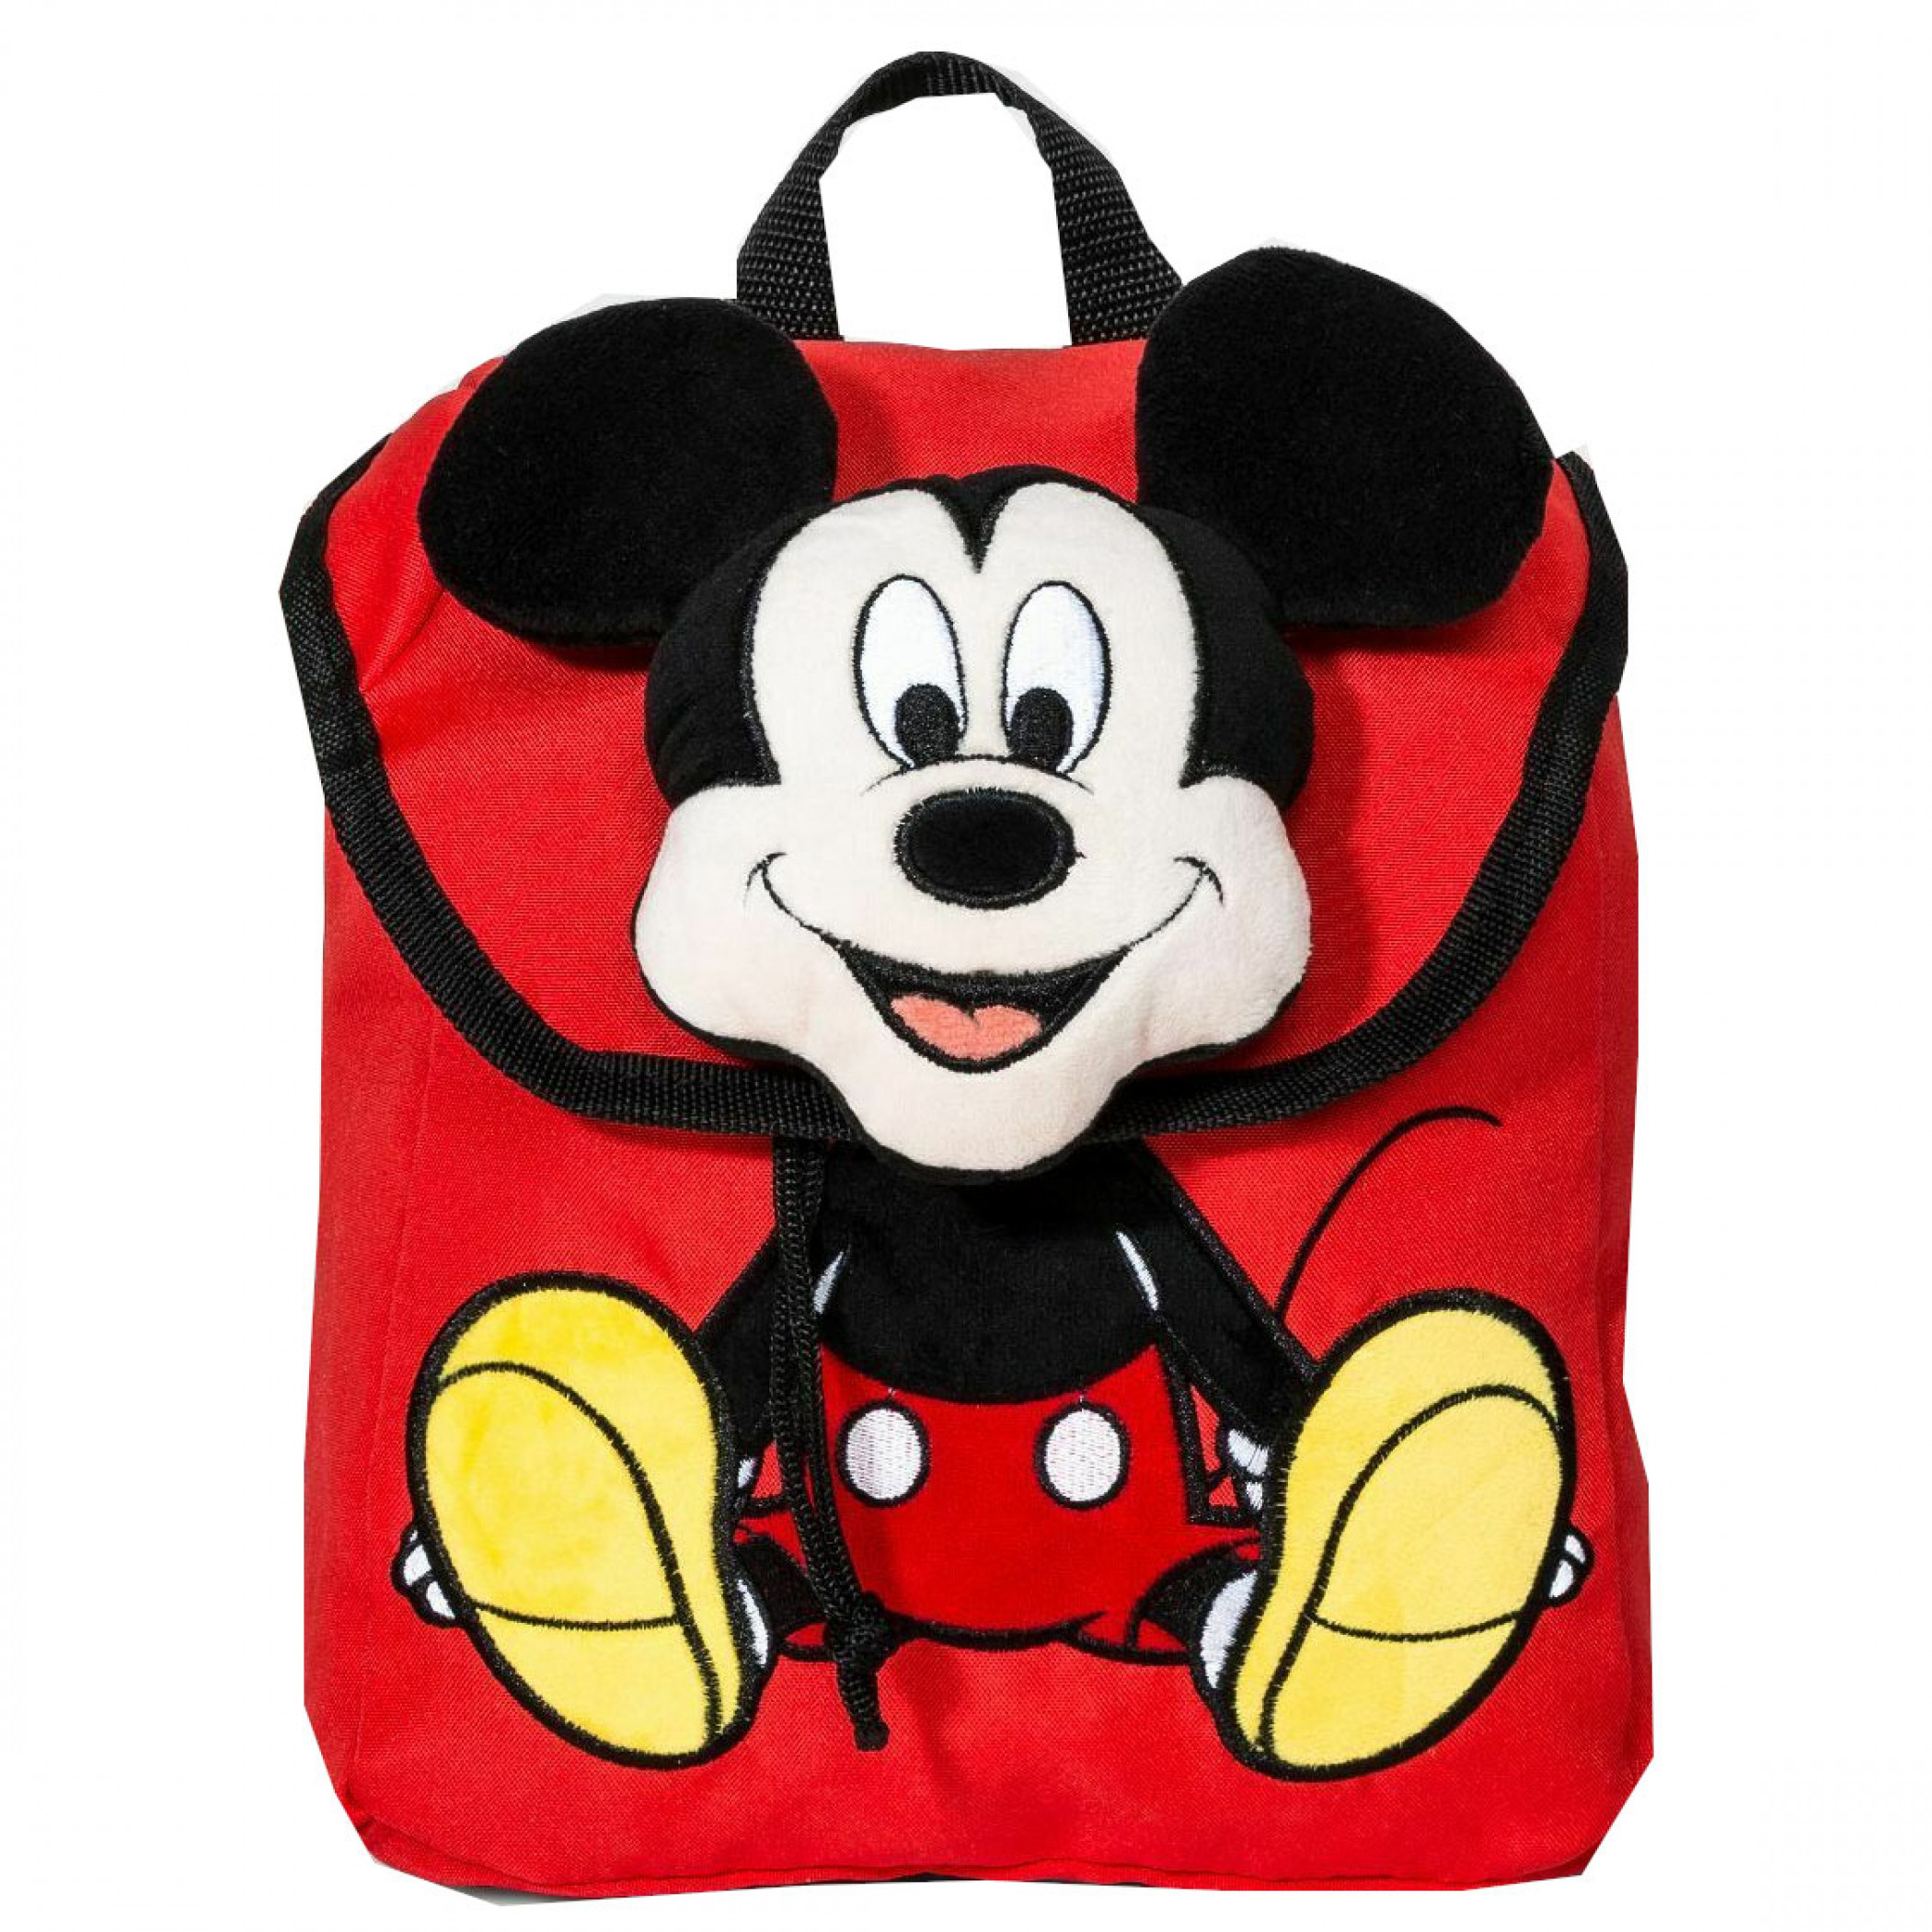 Disney Mickey Mouse & Friends Mickey Mouse Plush Backpack Bag